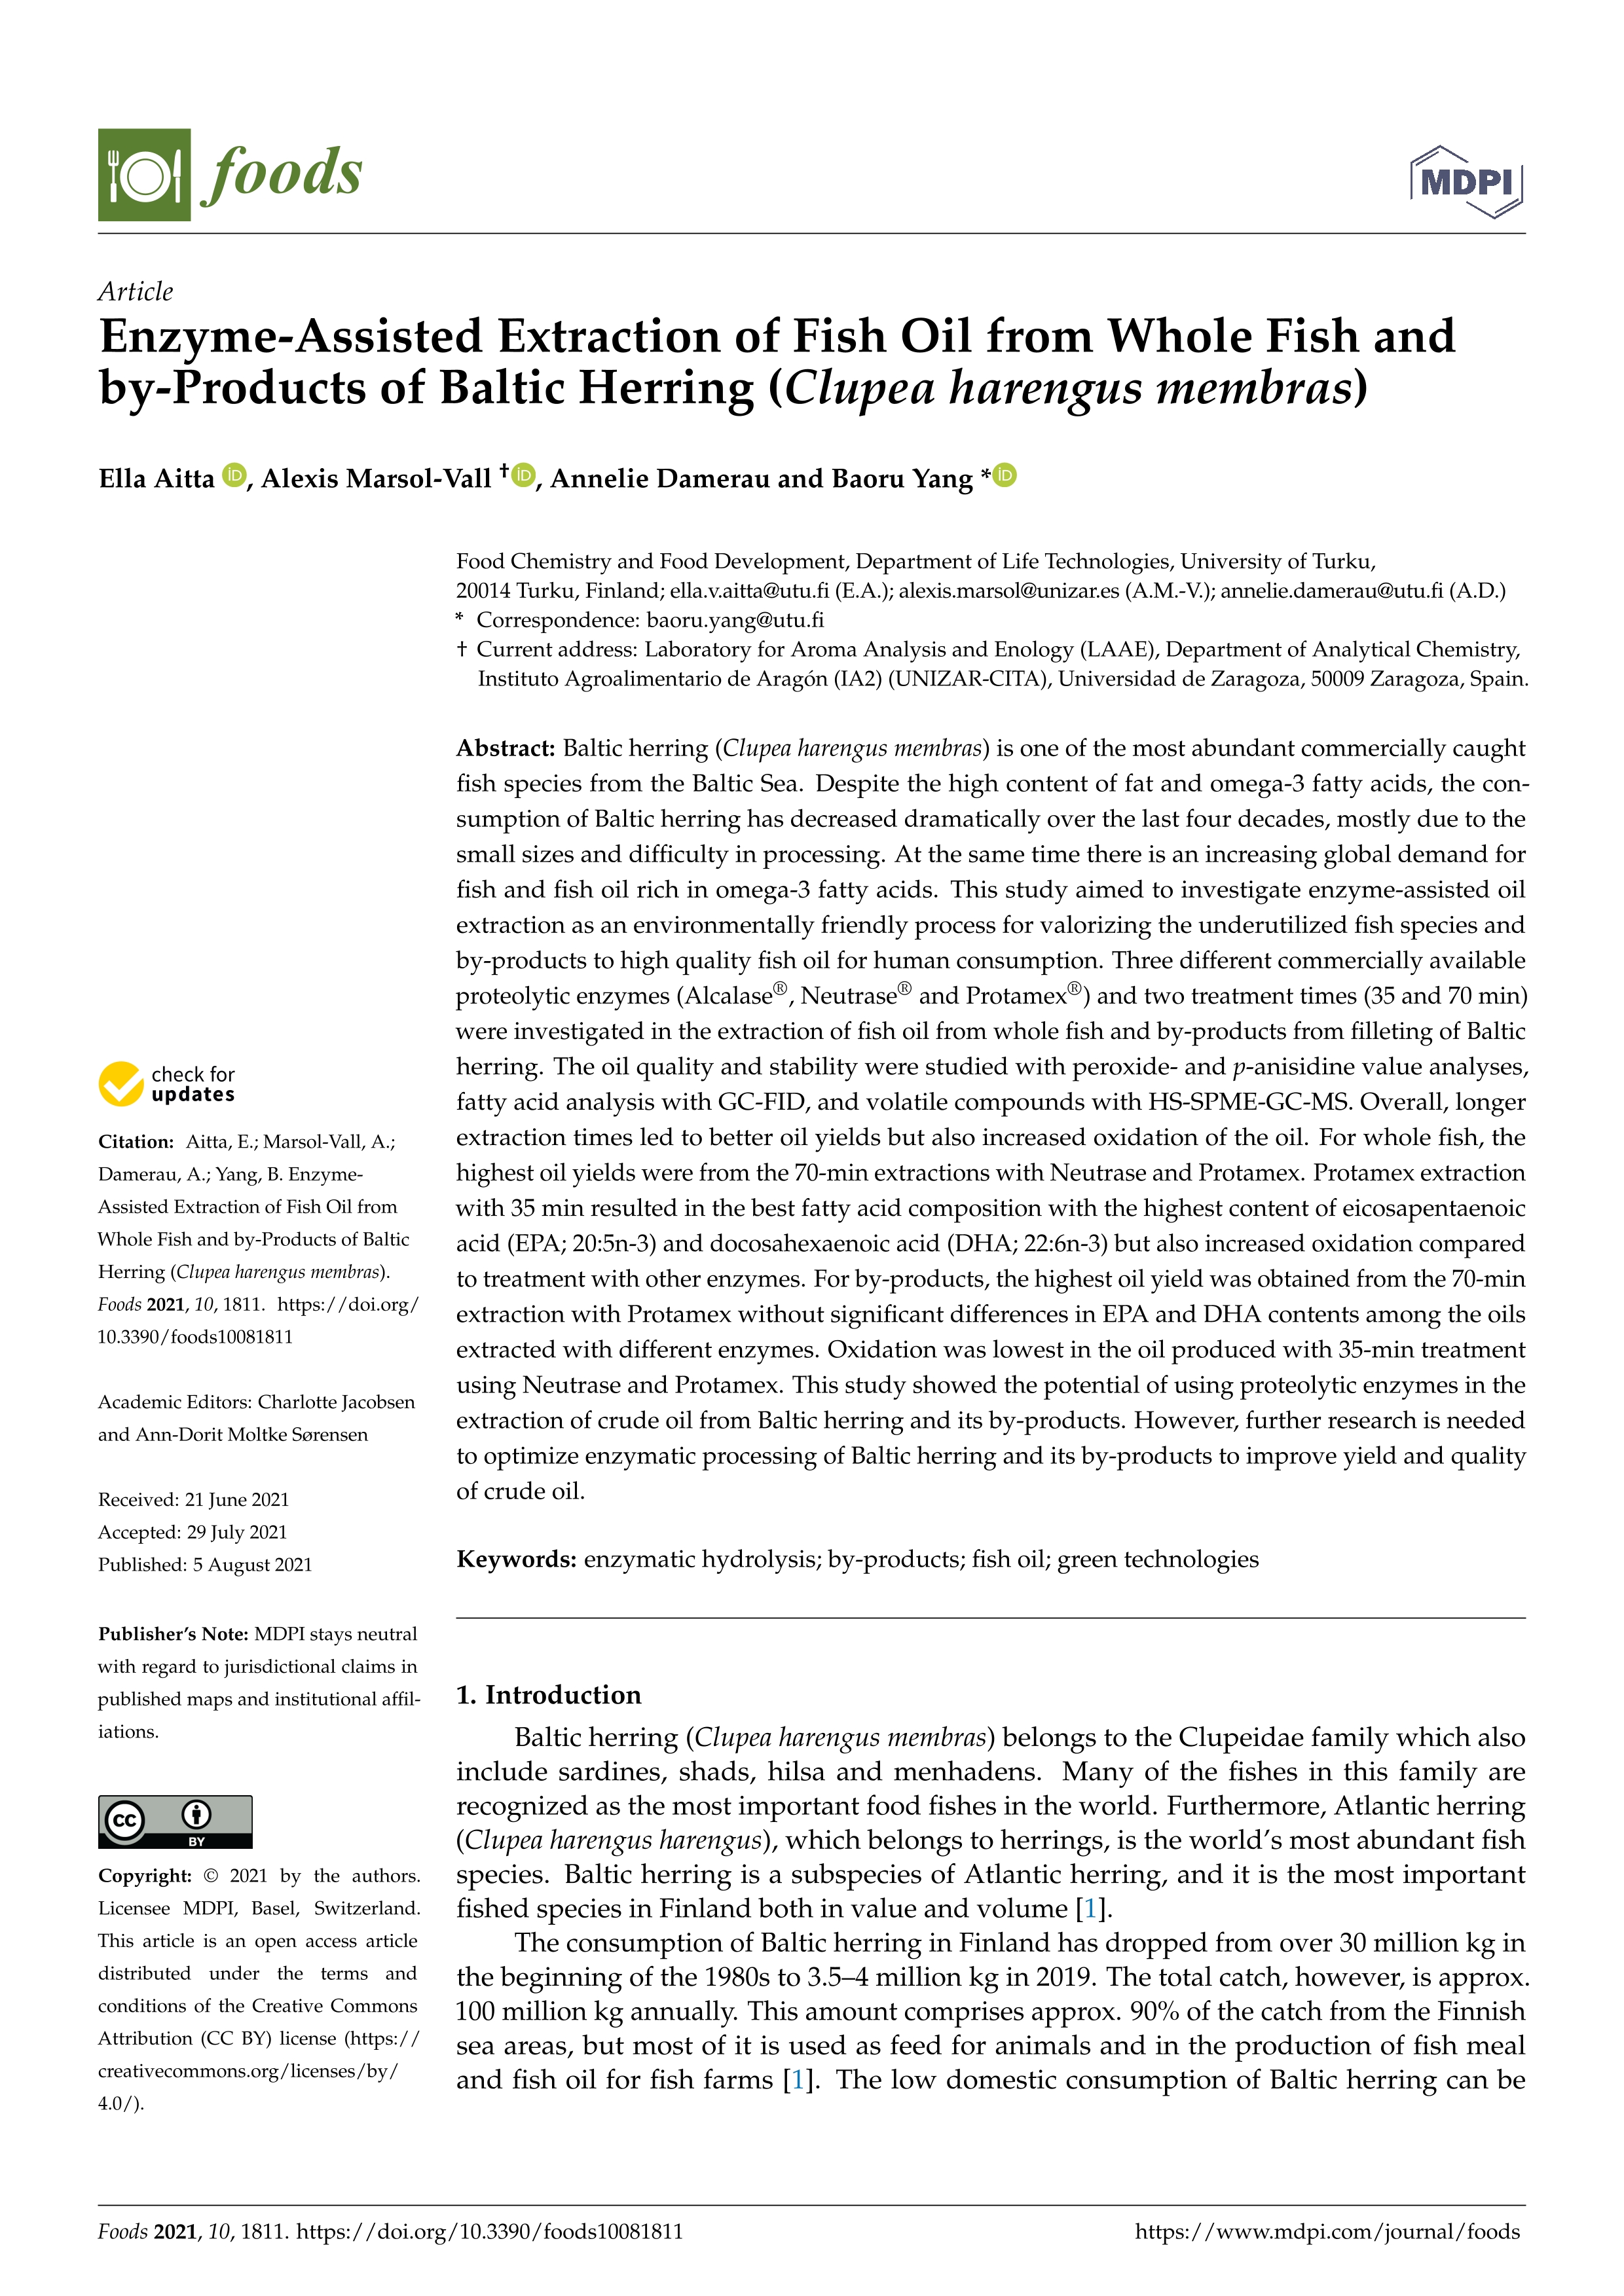 Enzyme-assisted extraction of fish oil from whole fish and by-products of Baltic herring (Clupea harengus membras)